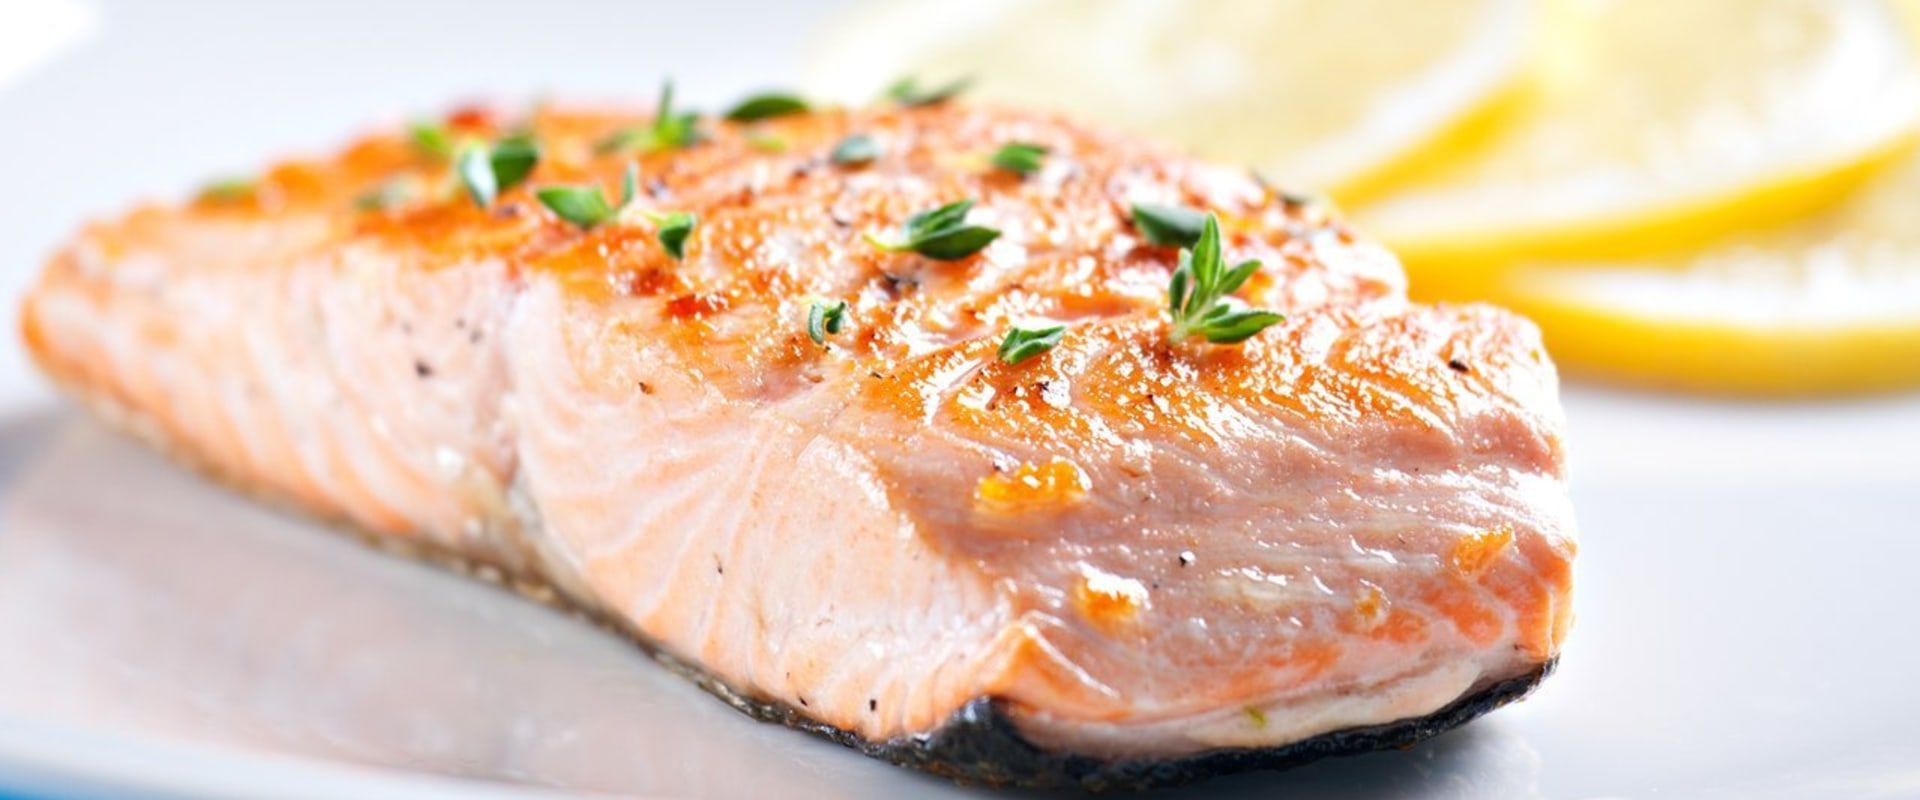 Healthy Fats For A Bodybuilder's Diet